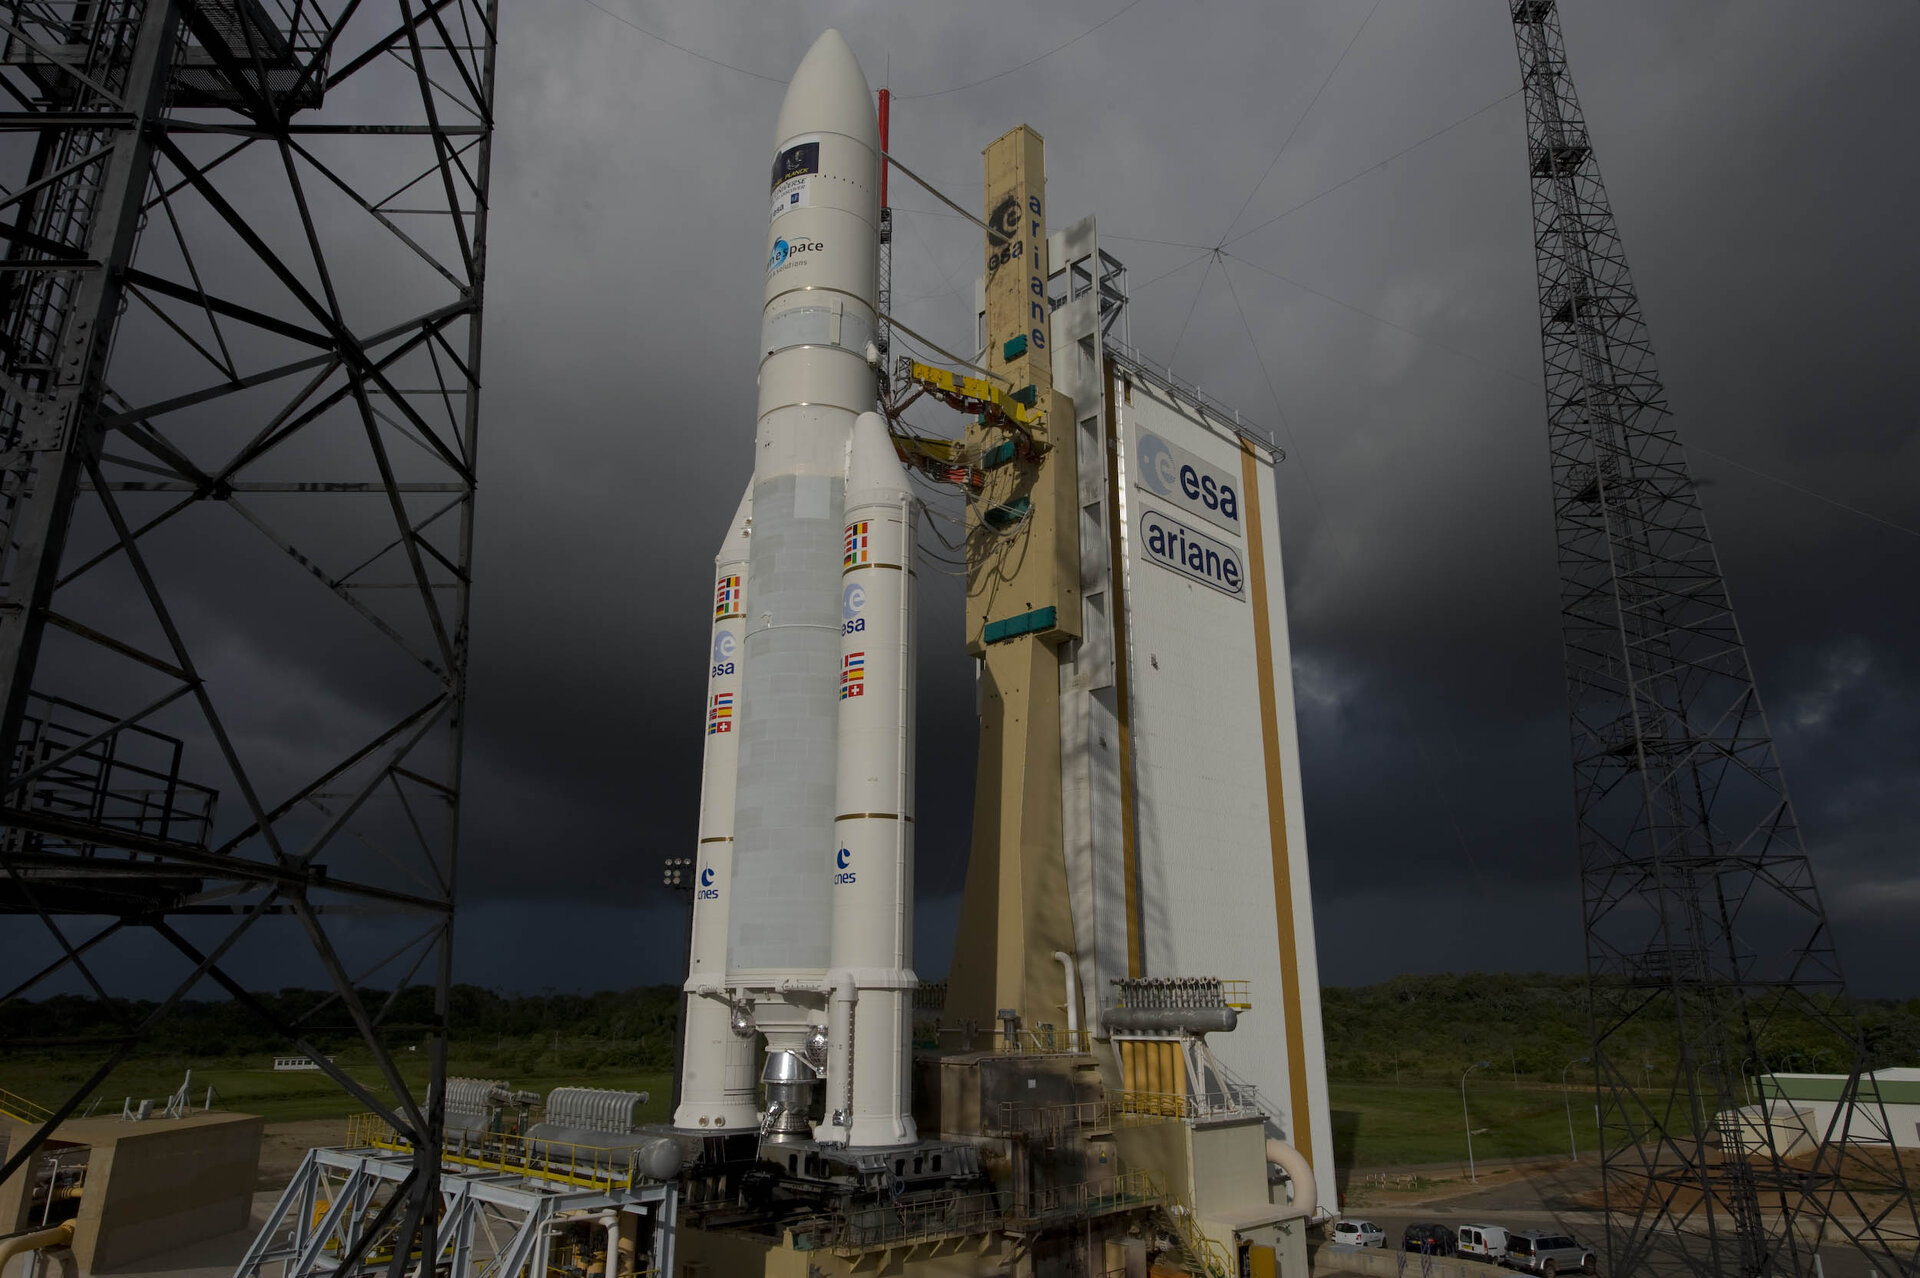 Ariane 5 with Herschel and Planck on the launch pad